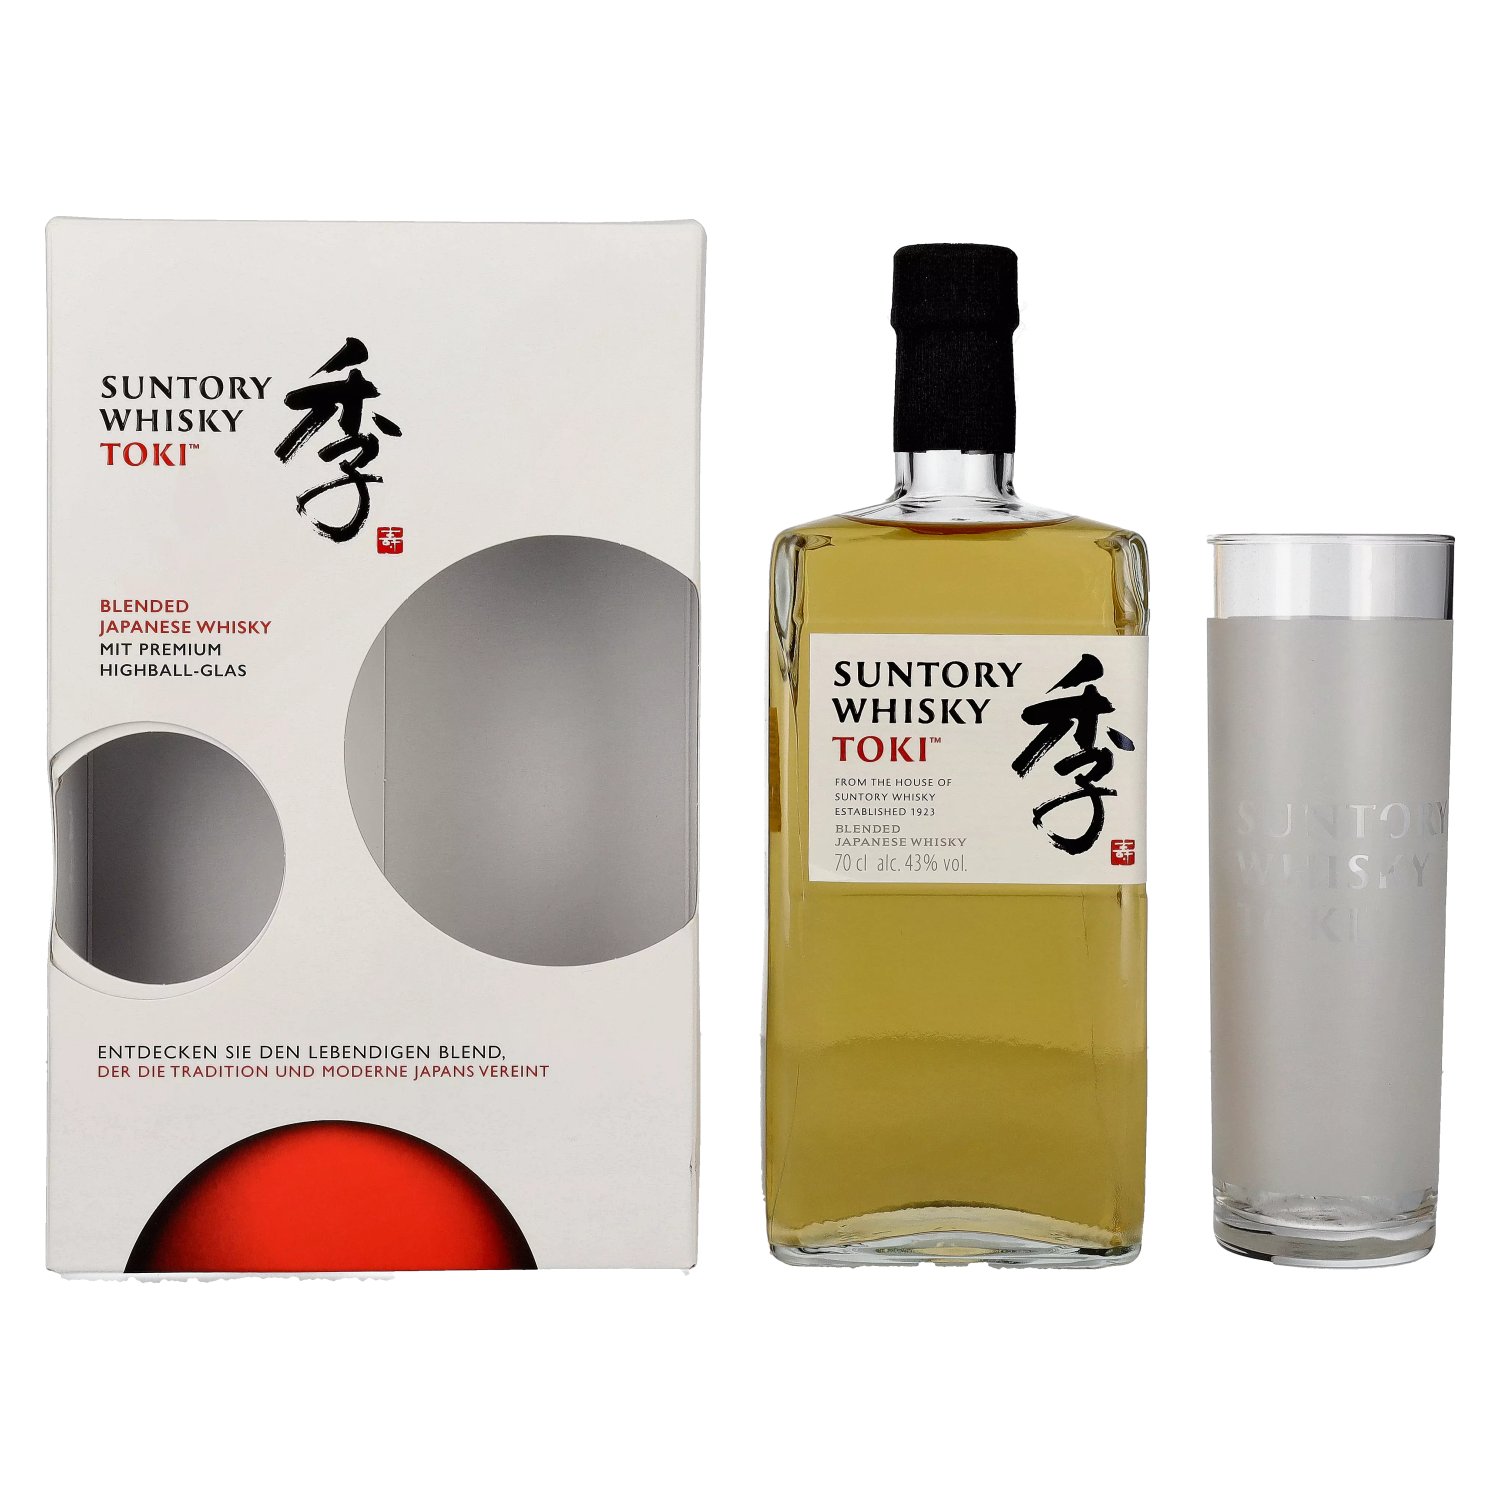 Suntory TOKI Blended Japanese in Whisky 43% glass Giftbox with Vol. Highball 0,7l